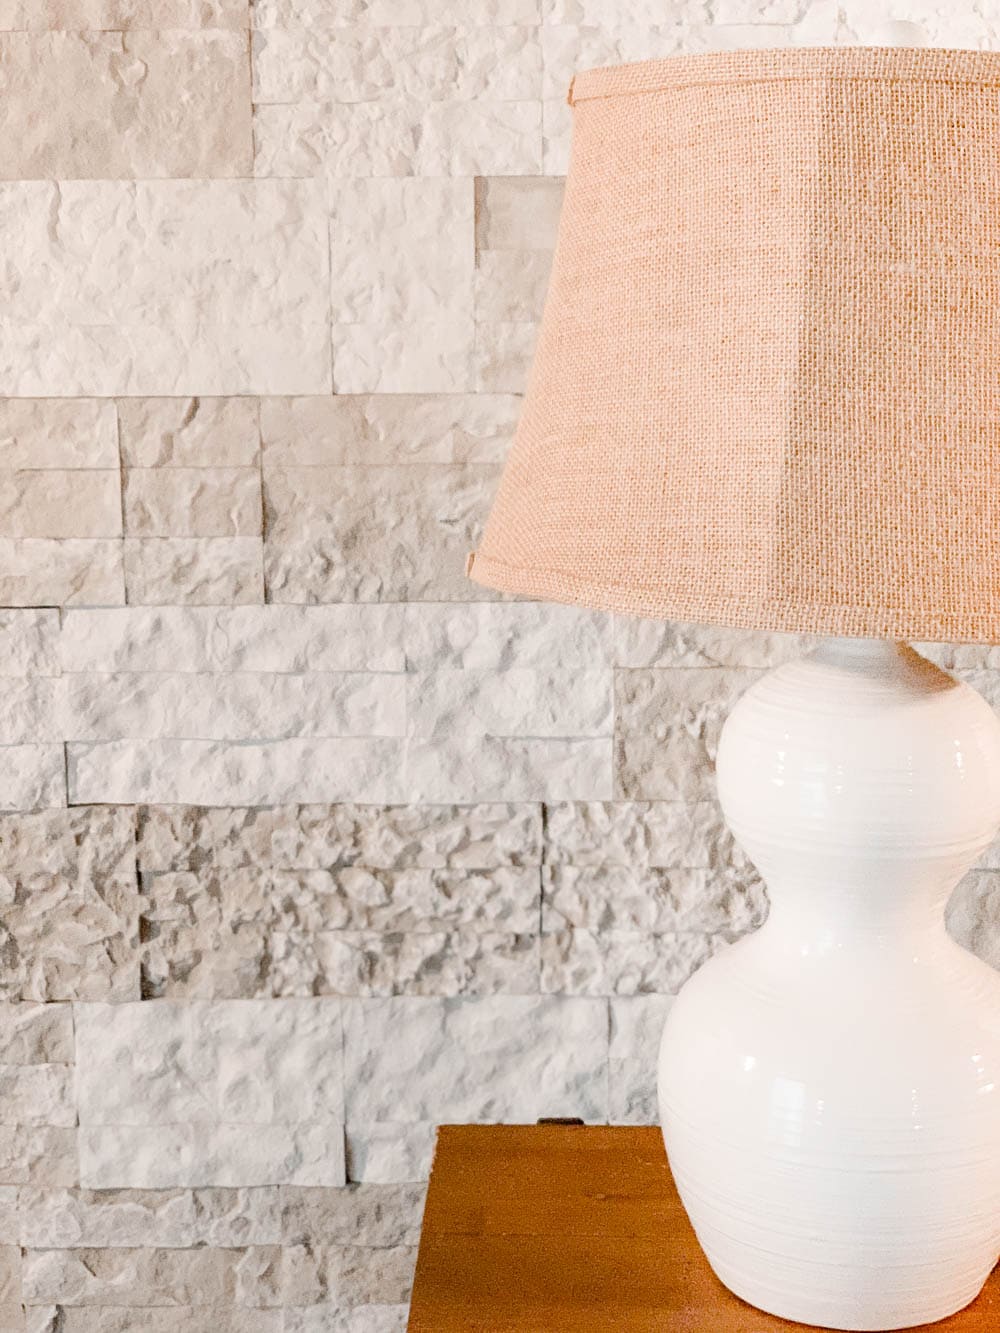 Tips and tricks on how to build a faux stone wall in your home. #ABlissfulNest #diytutorial